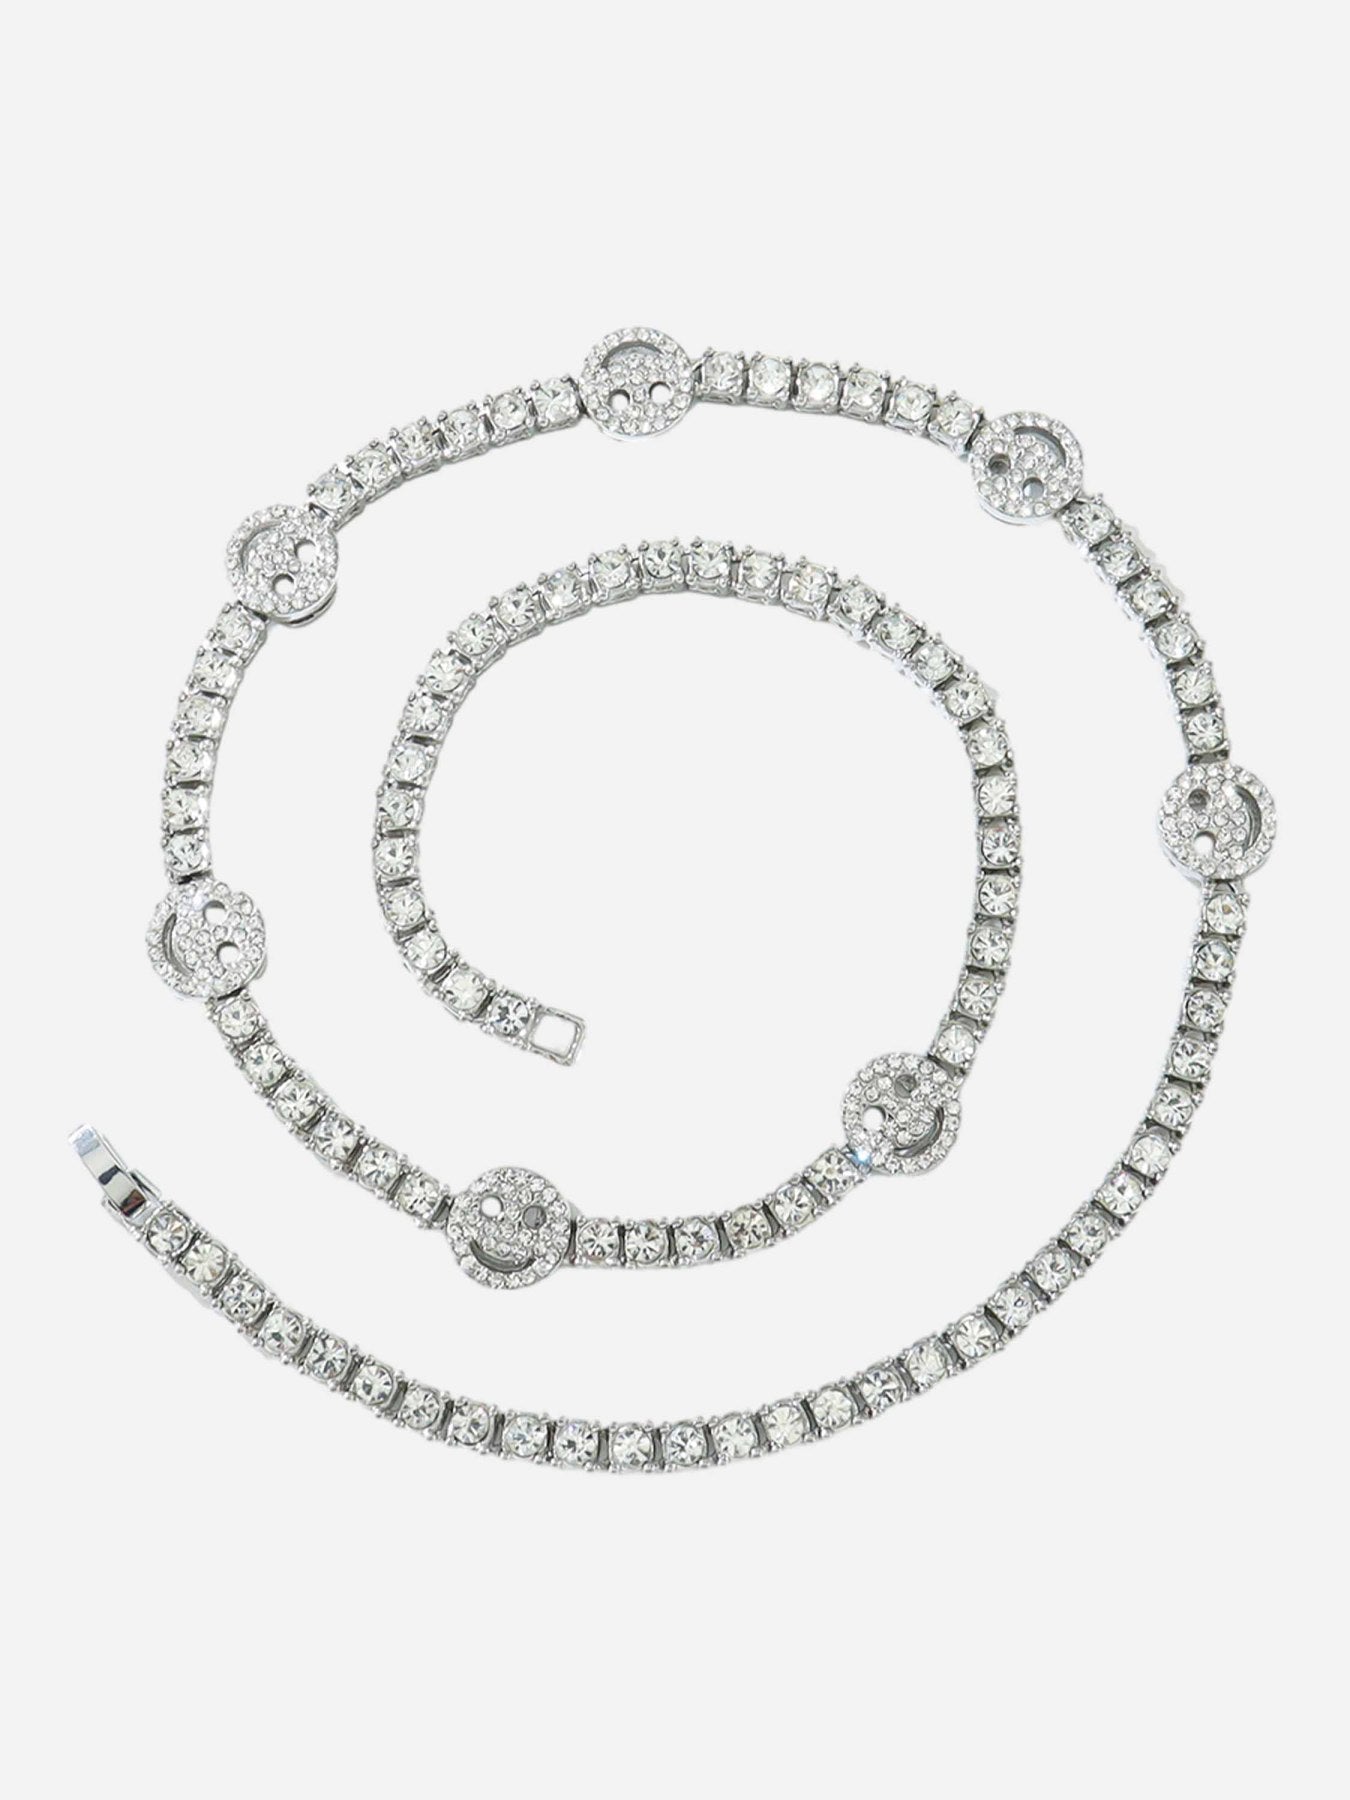 The Supermade Full Diamond Smile Necklace